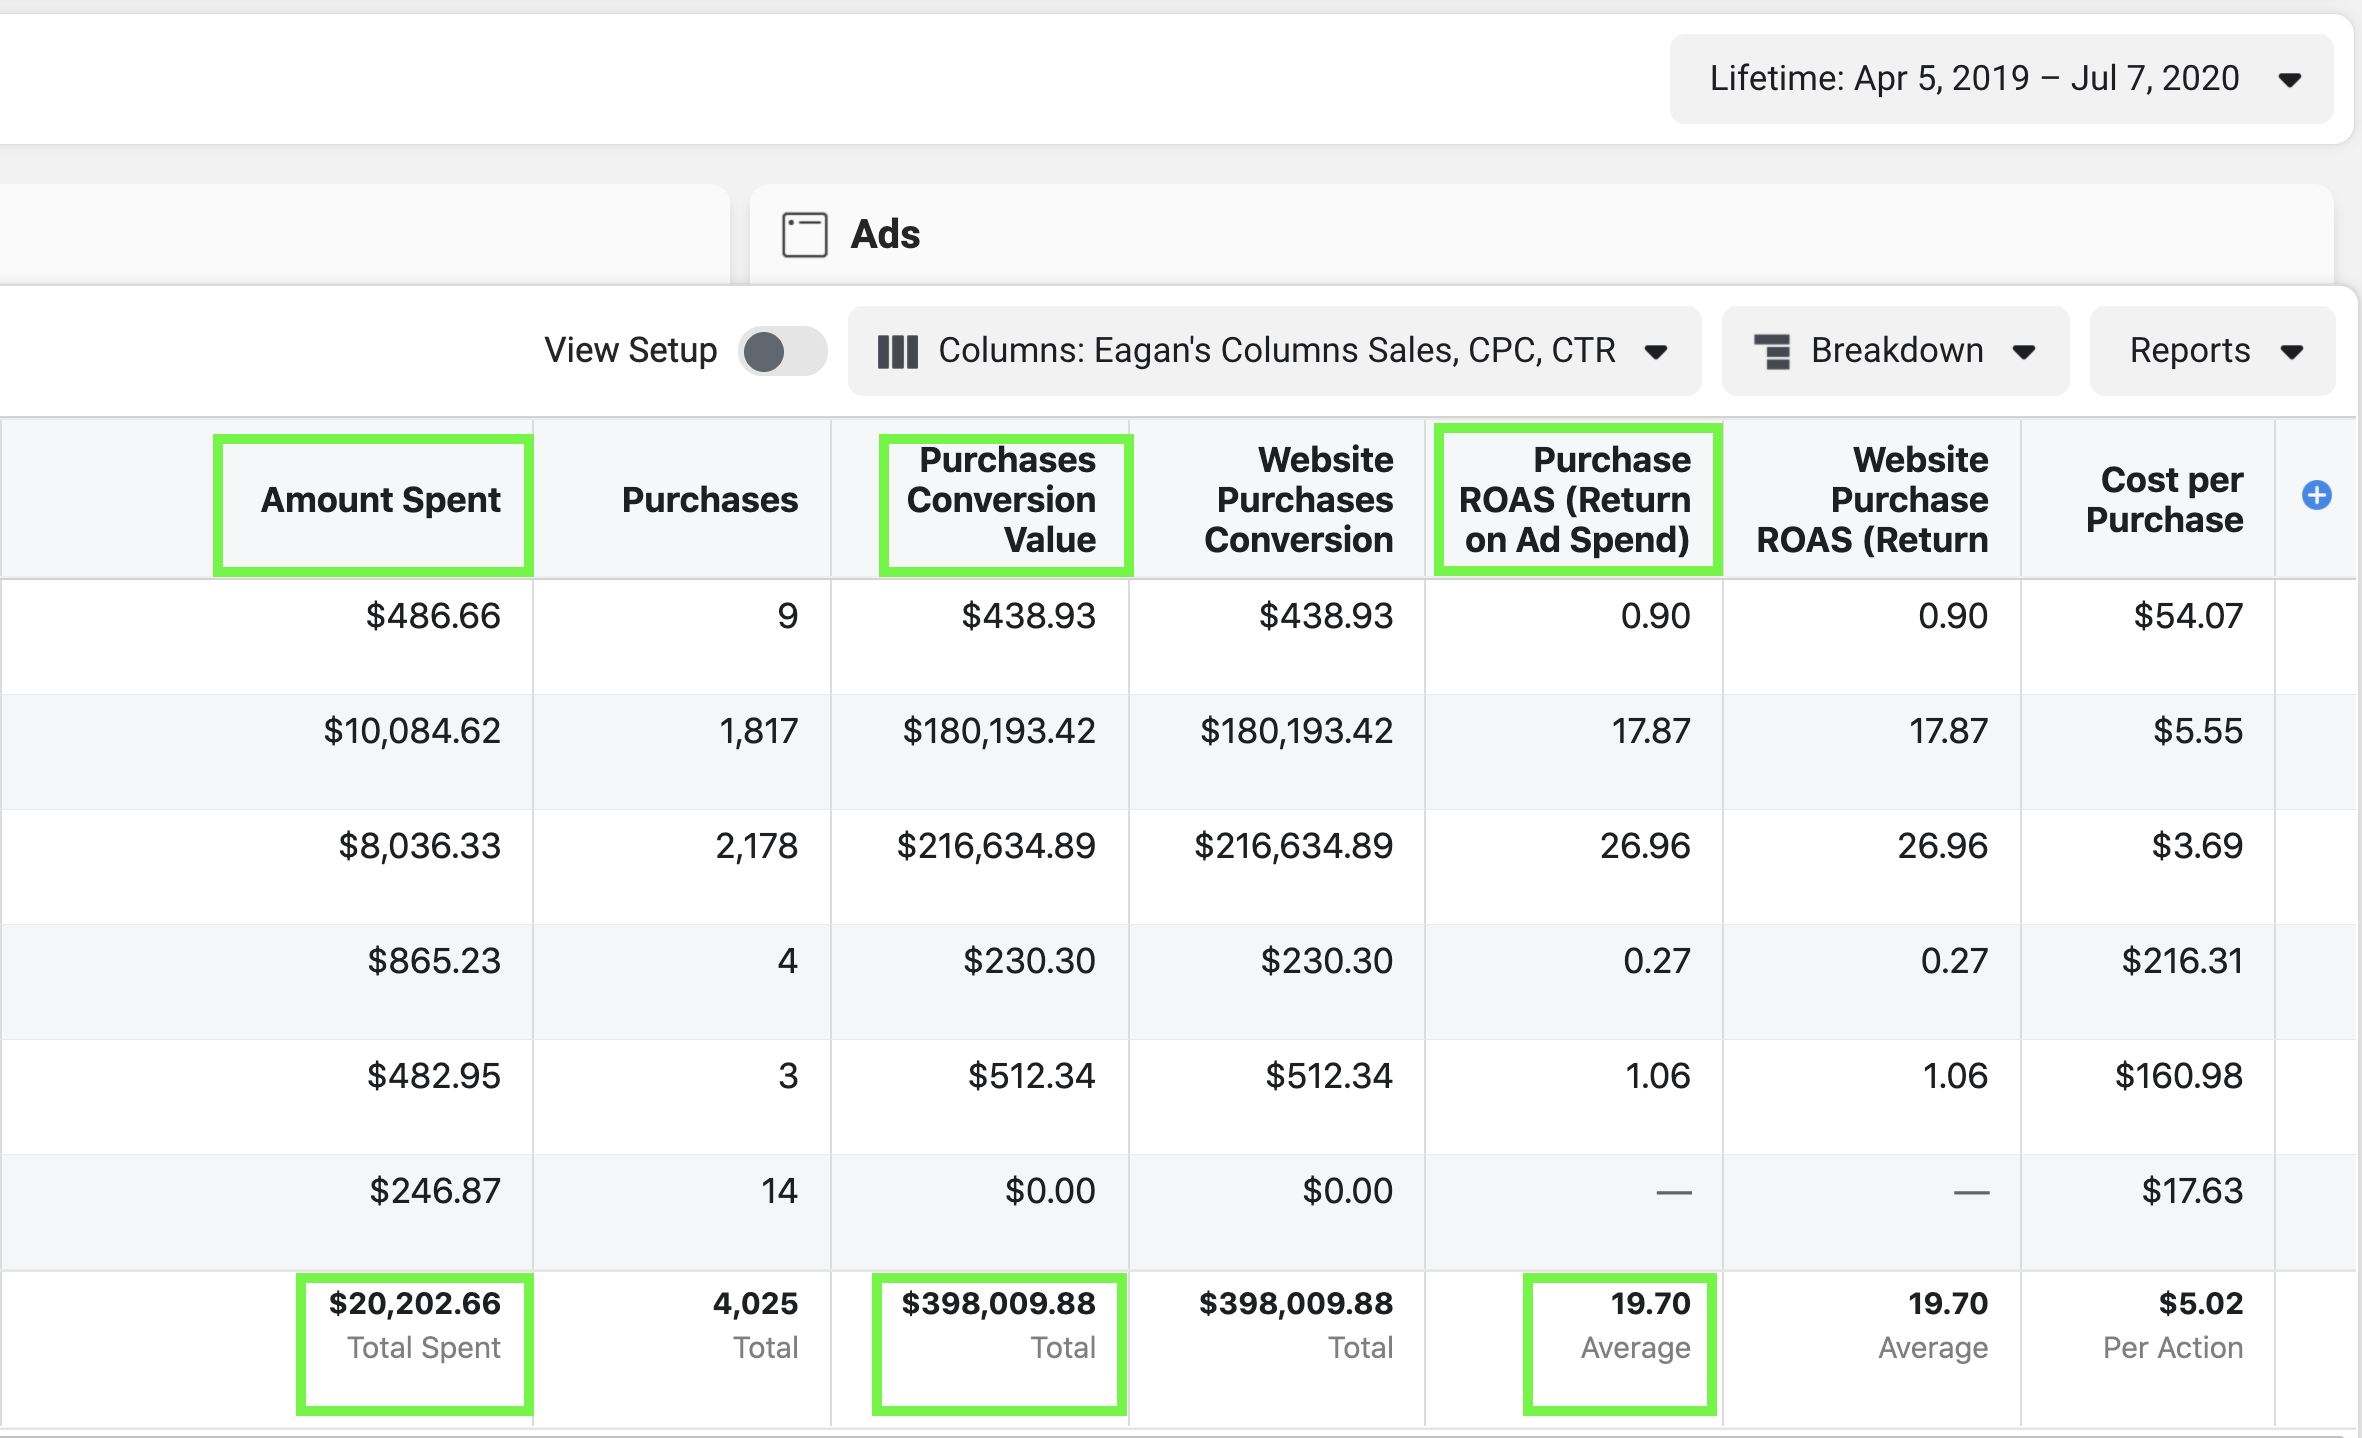 ecommerce facebook ad case study results from Get Found Madison showing over 19 ROAS